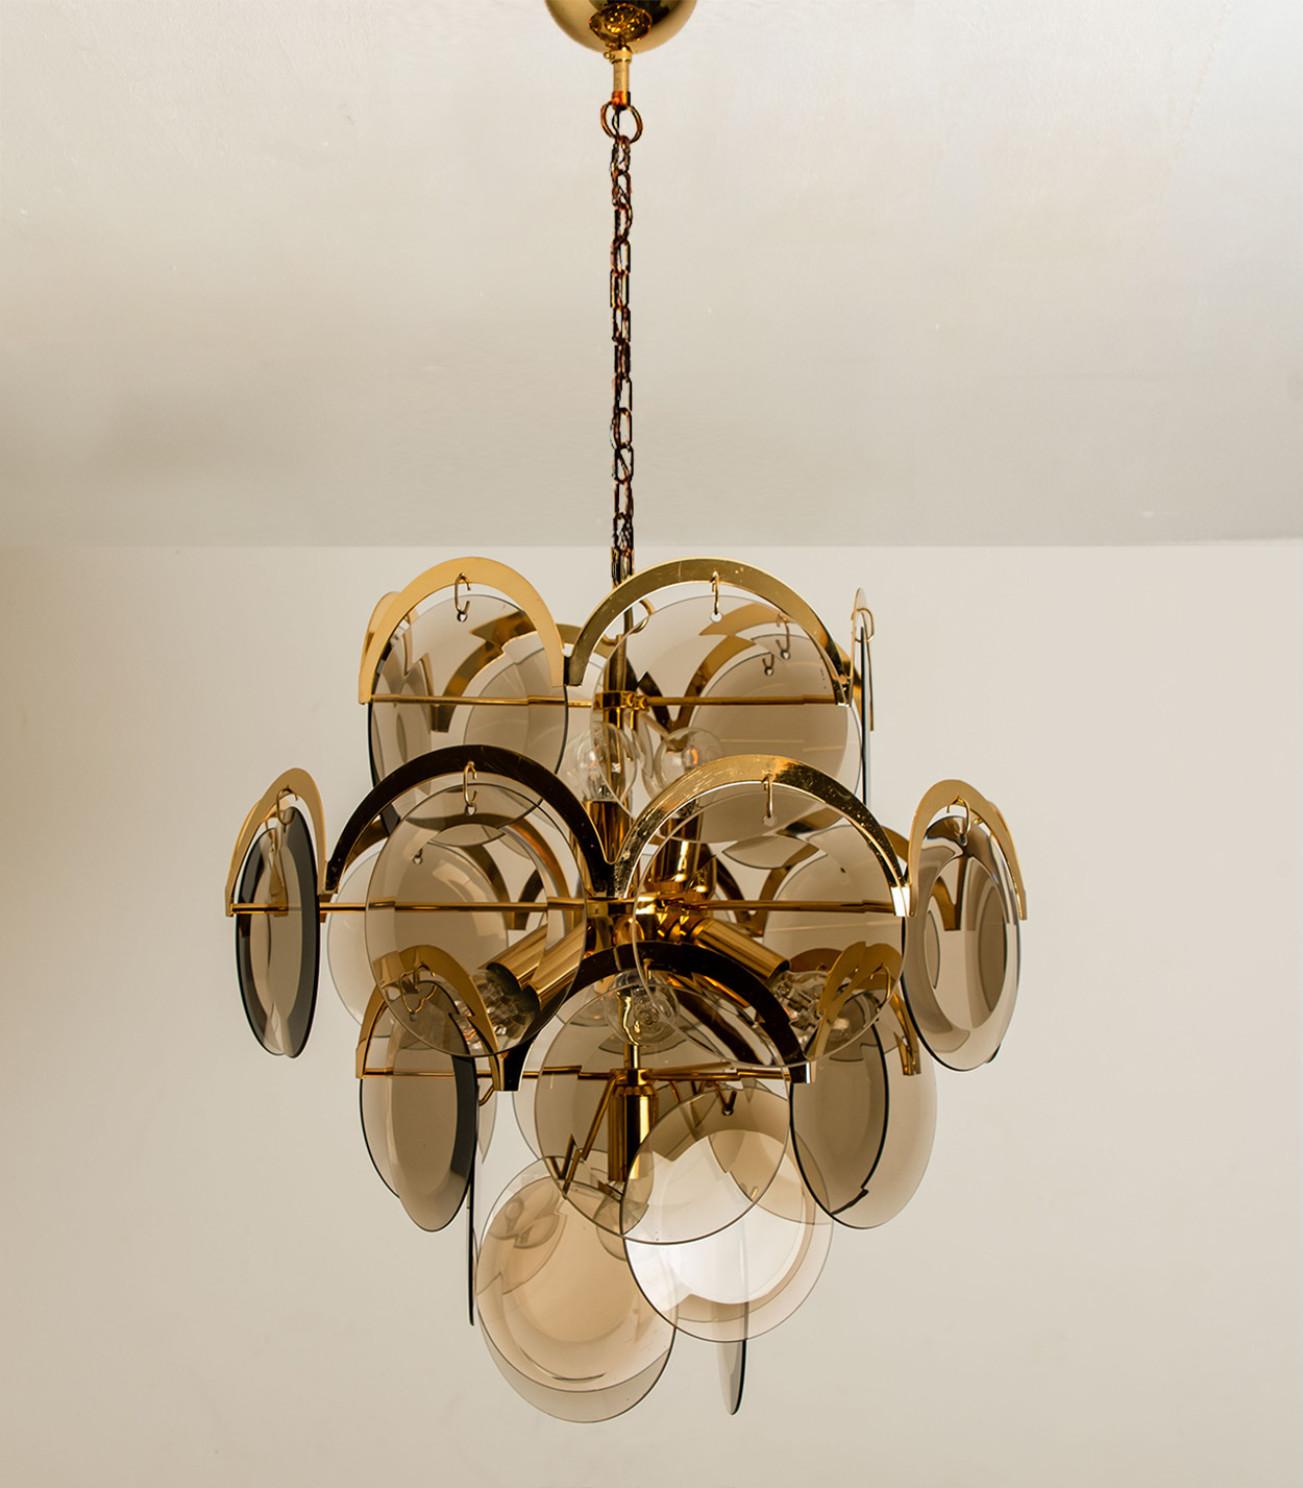 Pair of Smoked Glass and Brass Chandelier in style of Vistosi, Italy, 1970s For Sale 6